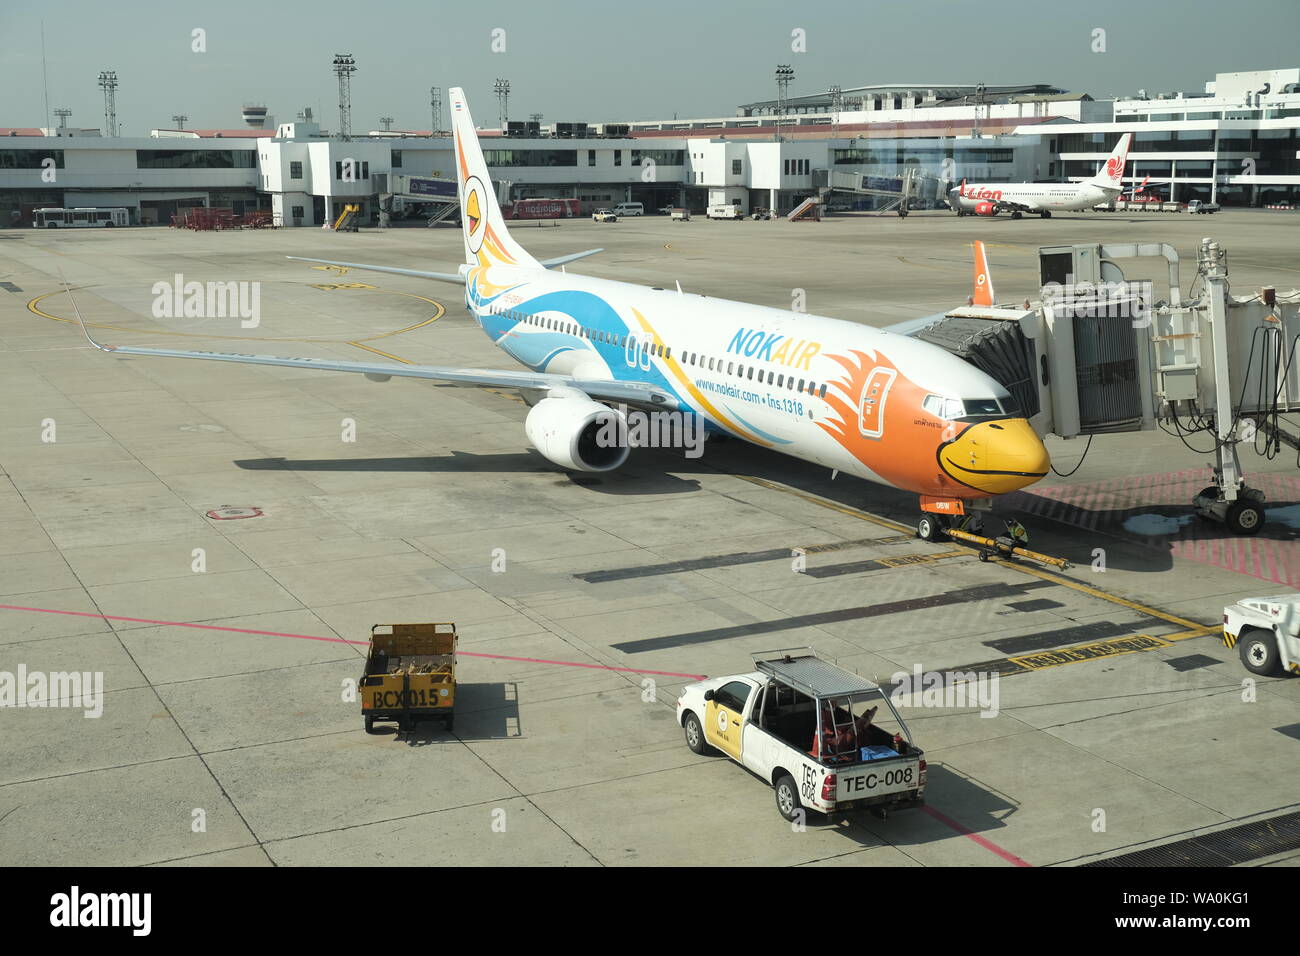 BANGKOK, THAILAND - December 13, 2018: The airline Nok Air at Dong Muang Airport. local routes in Thailand Stock Photo